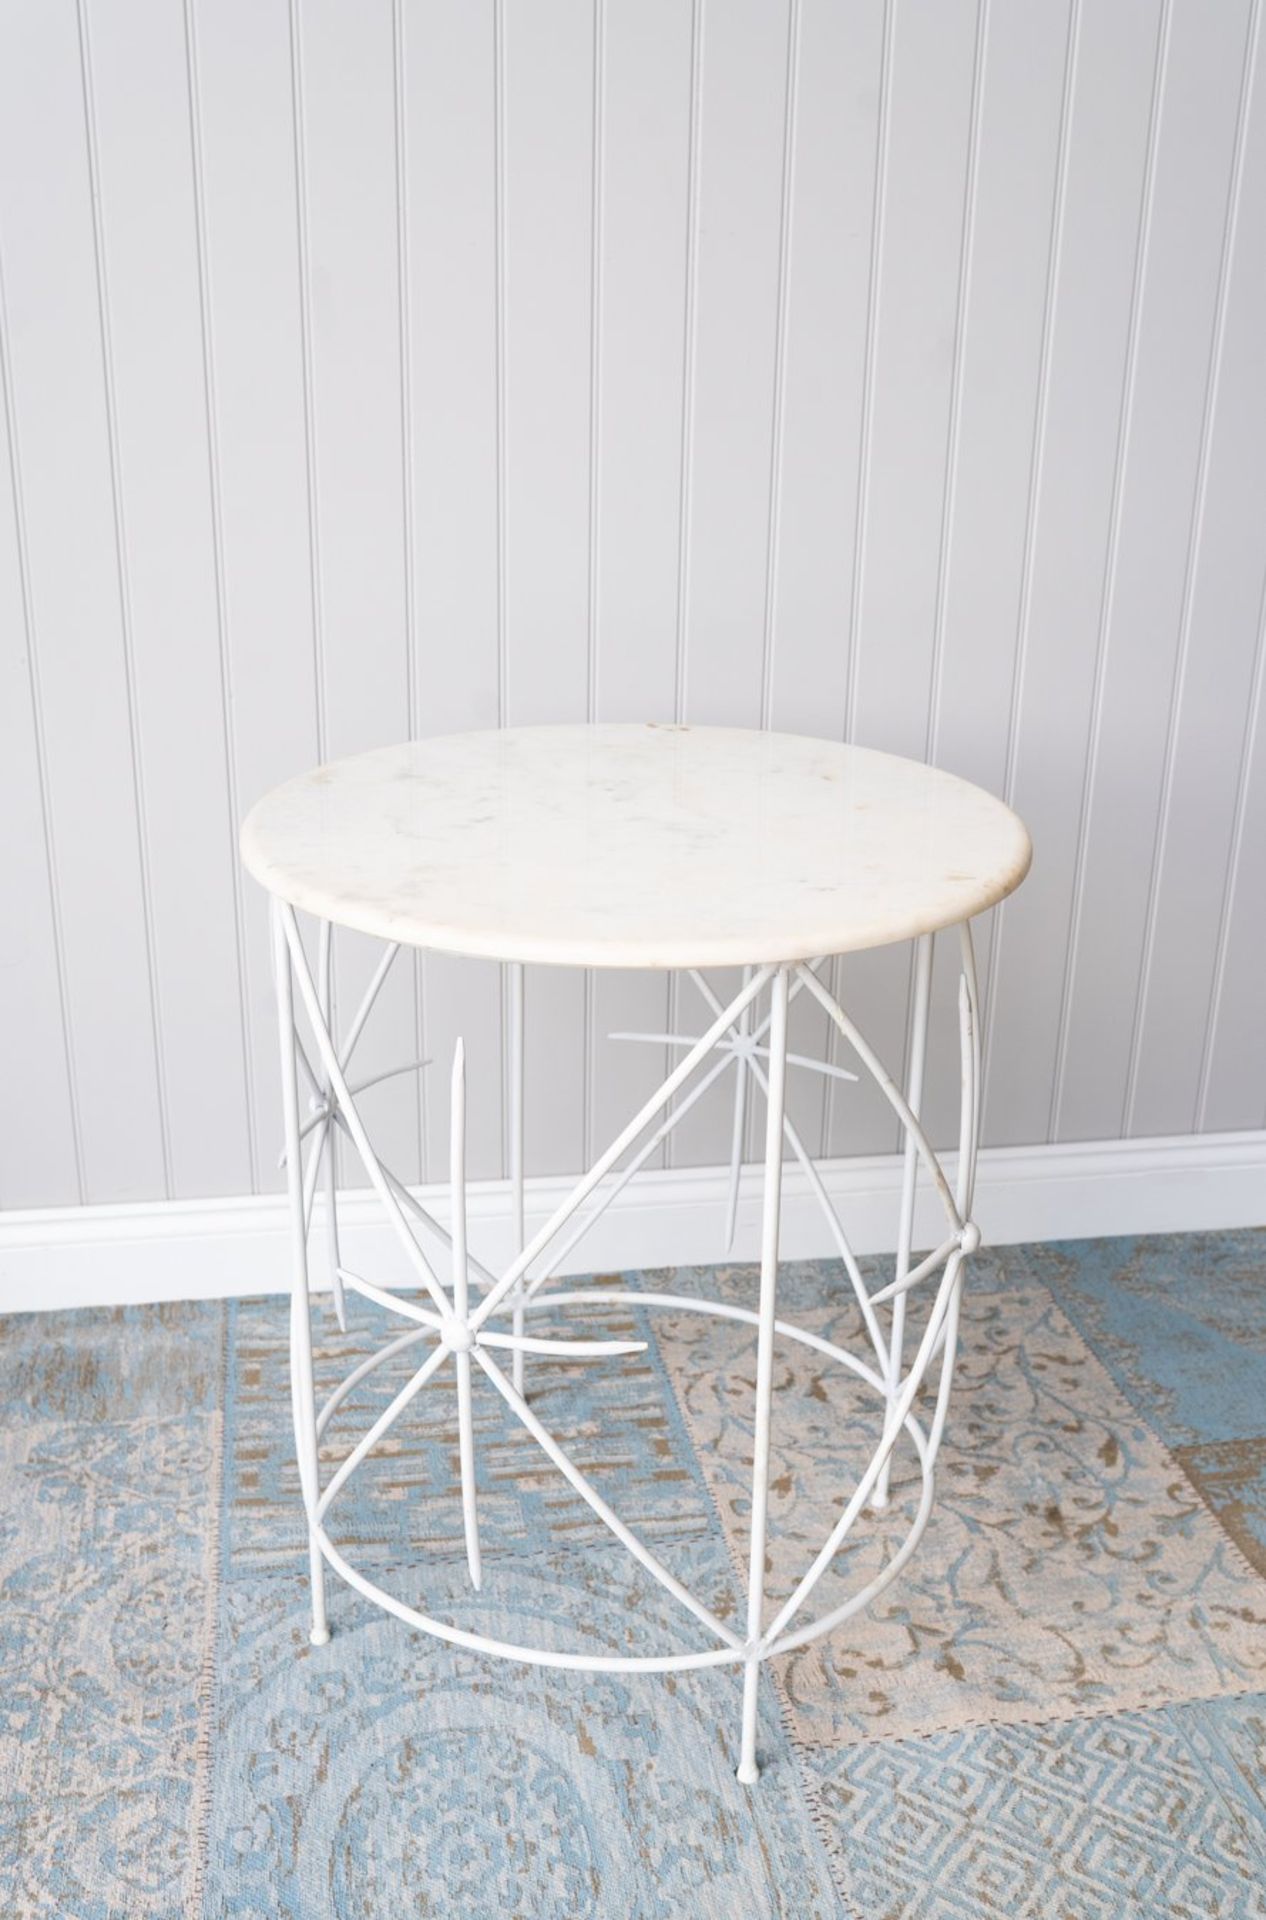 Side Table - White and White Distress: A gorgeous large side table finished in a bright white